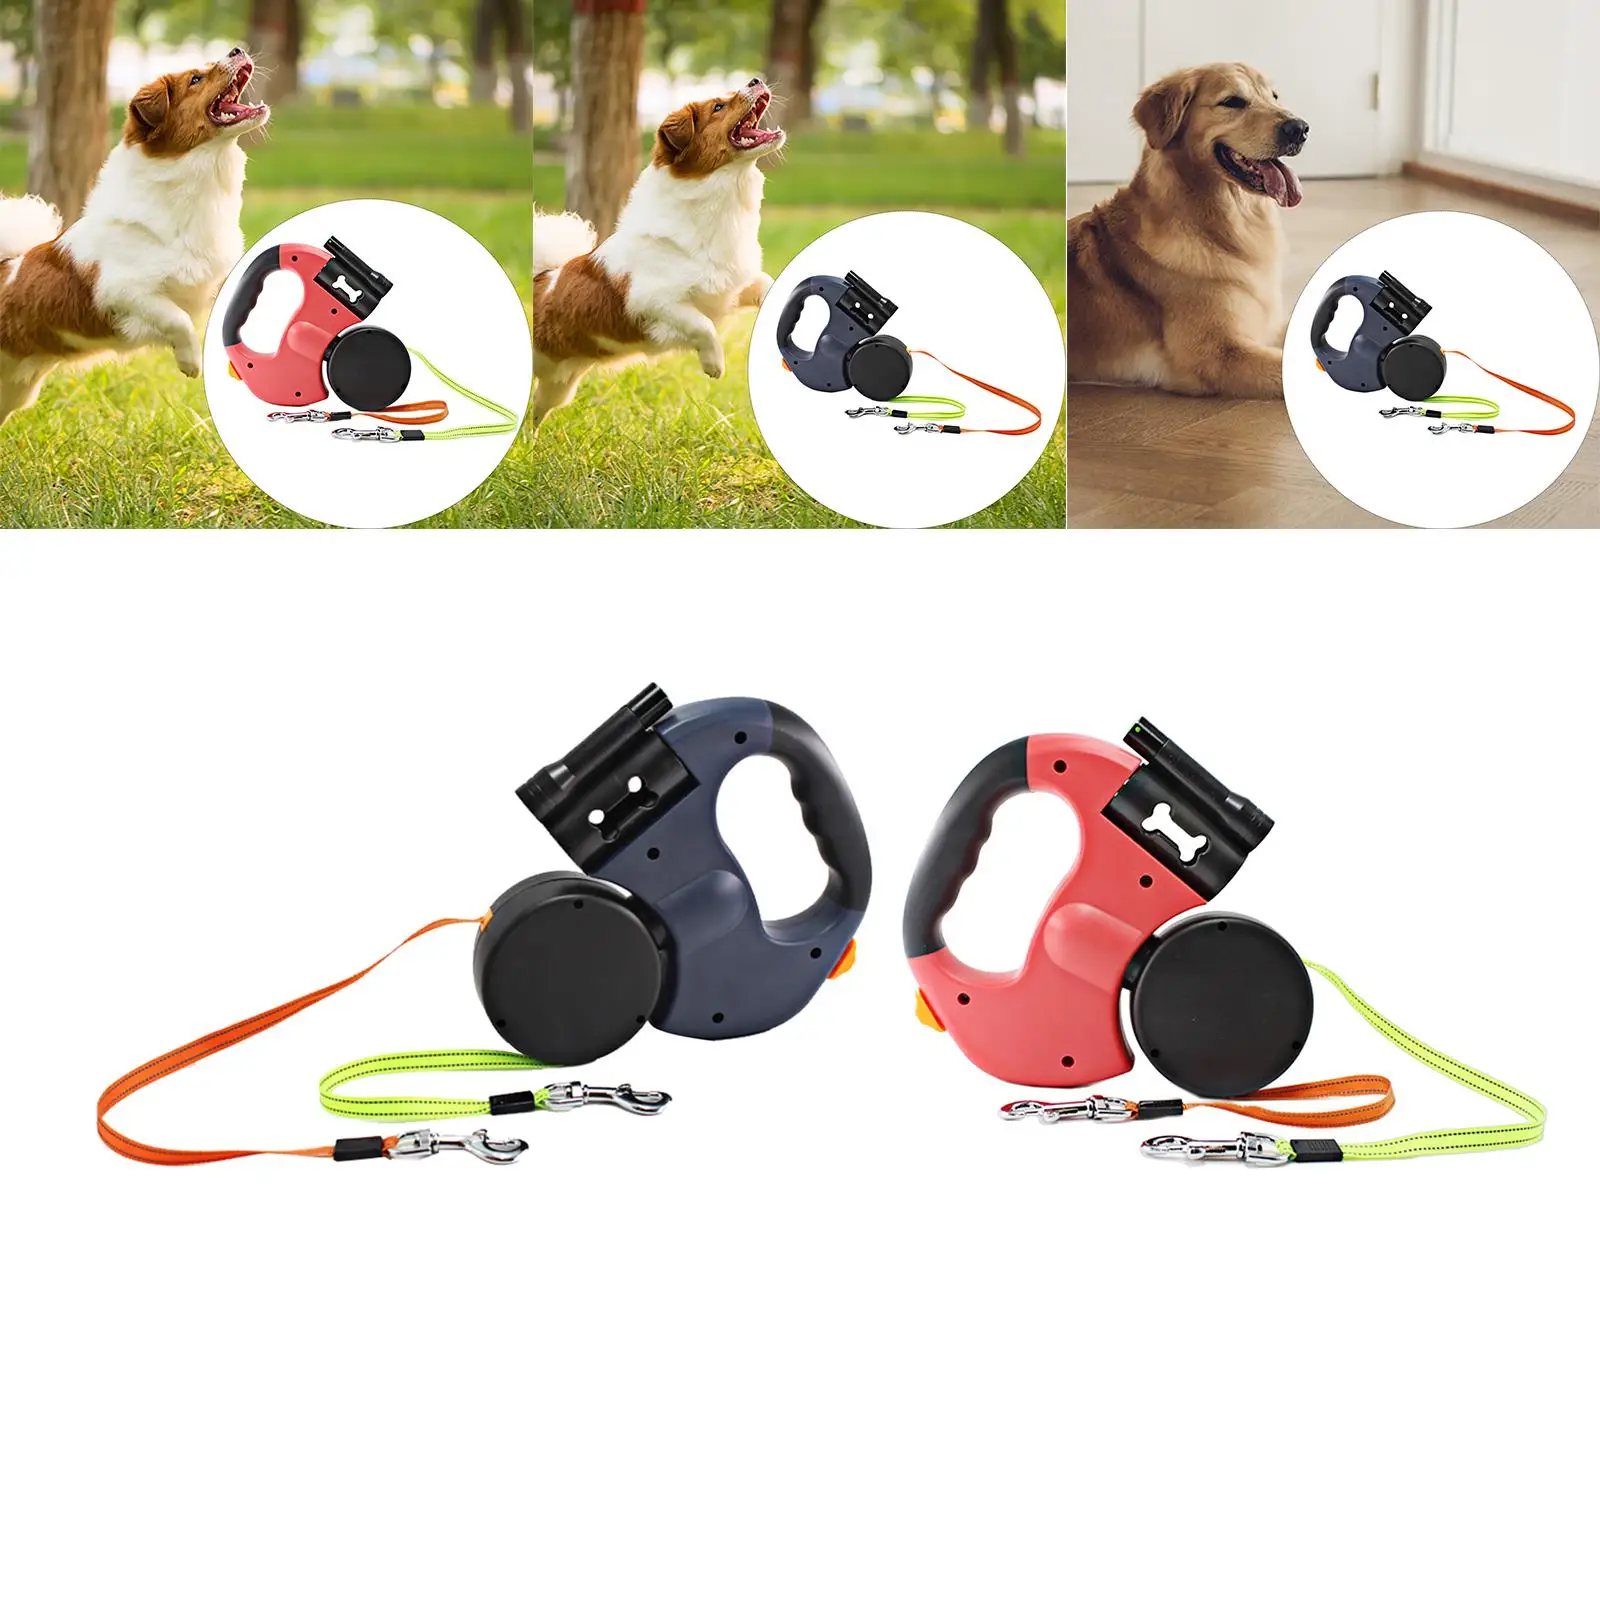 Double Retractable Dog Leash Nonslip Grip with Garbage Bag Dispenser for Small Medium Dogs